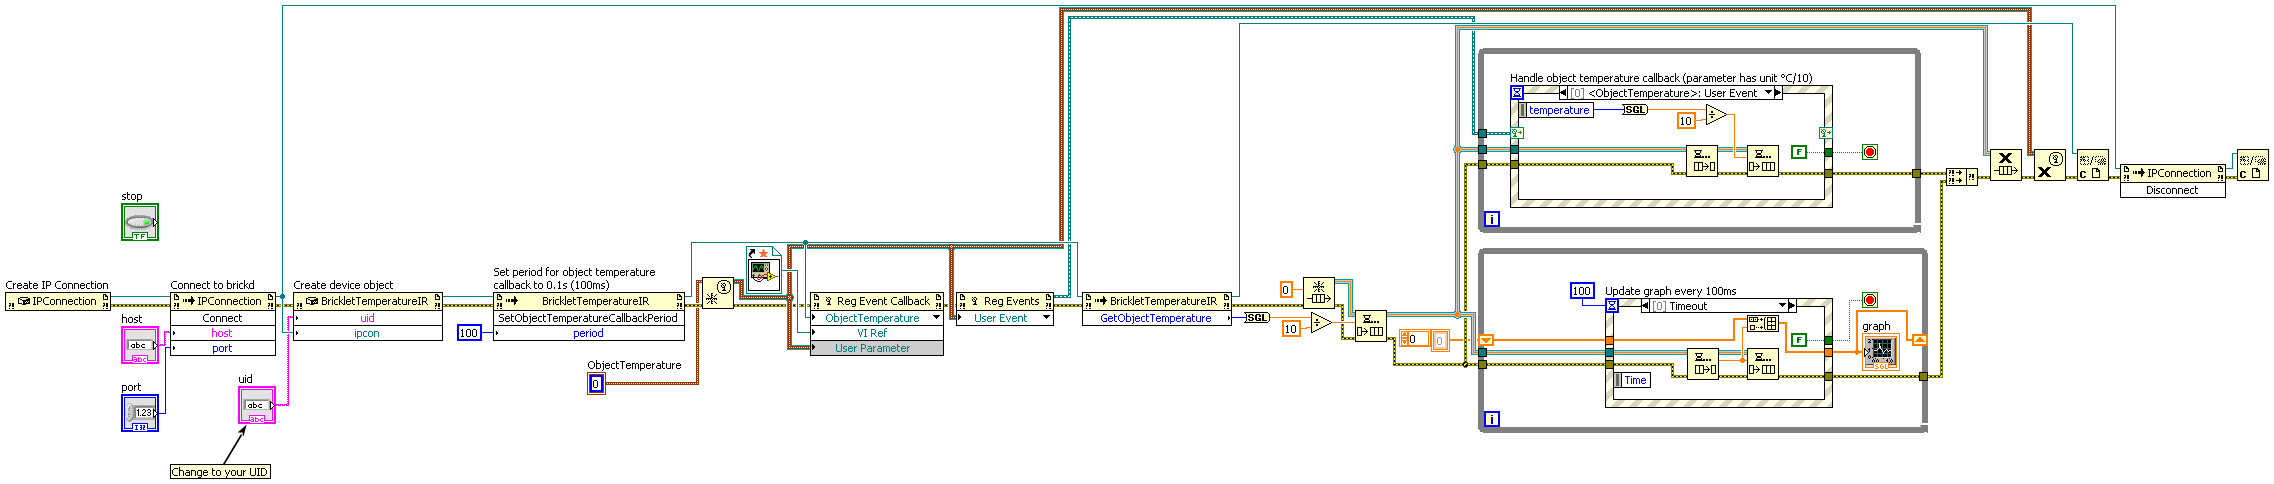 LabVIEW Graph Example